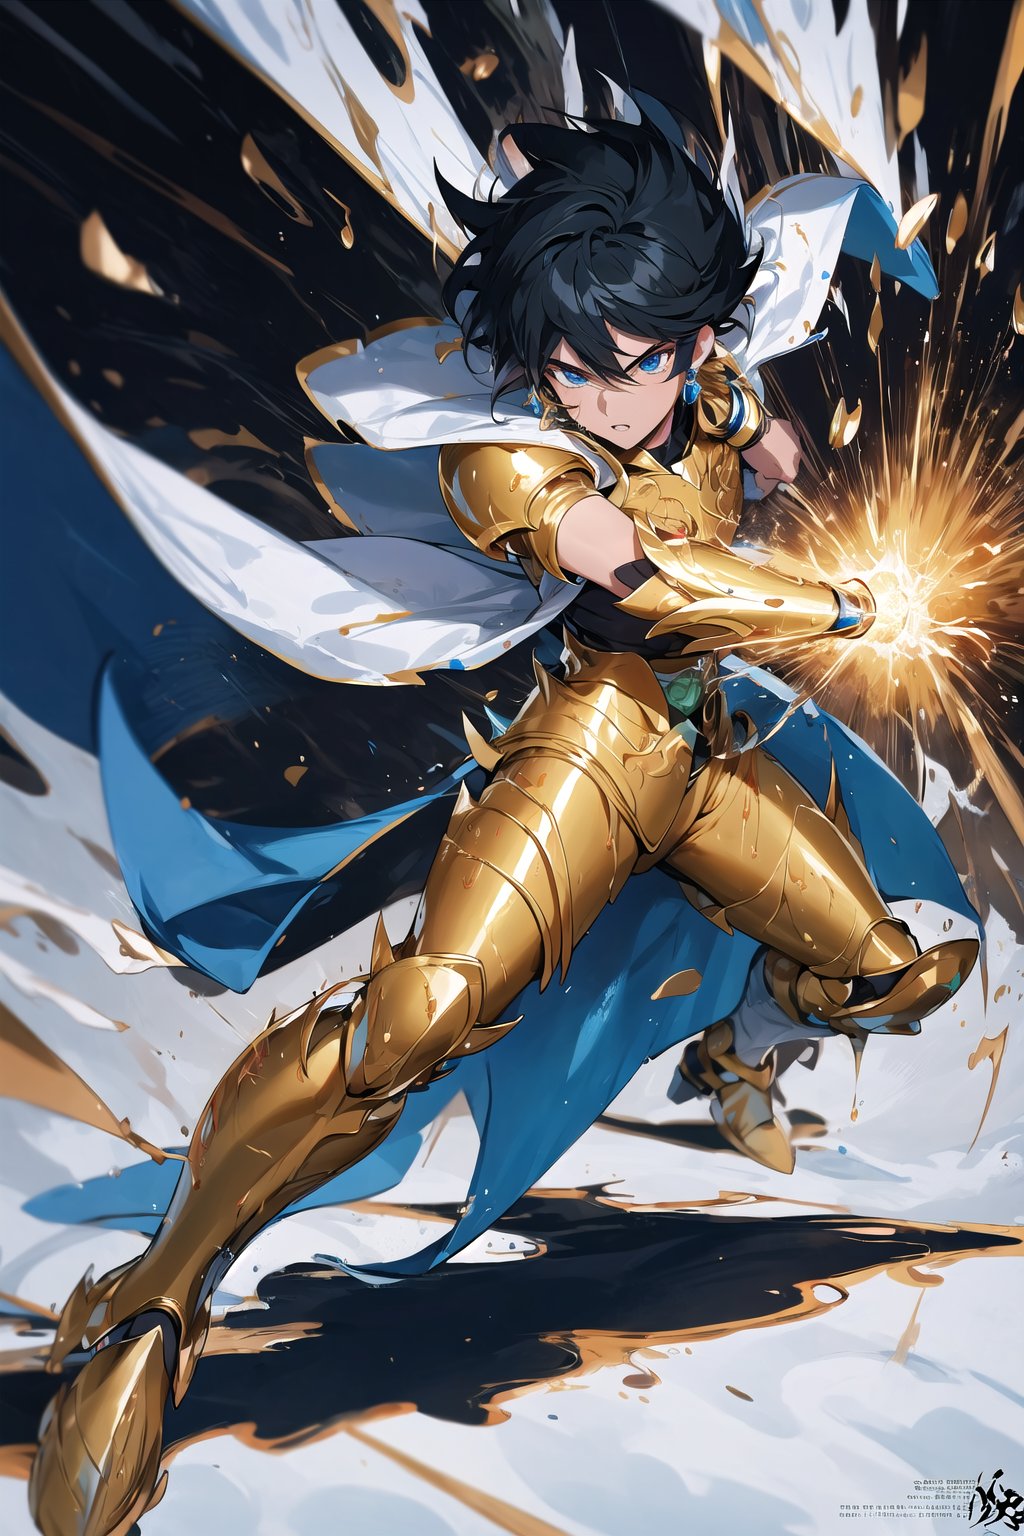 absurdres, highres, ultra detailed,Insane detail in face,  (boy:1.3), Gold Saint, Saint Seiya Style, paint splatter, expressive drips, random patterns, energetic movement, bold colors, dynamic texture, spontaneous creativity, Gold Armor, Full body armor, no helmet, Zodiac Knights, White long cape, Black hair, Fighting pose,Pokemon Gotcha Style